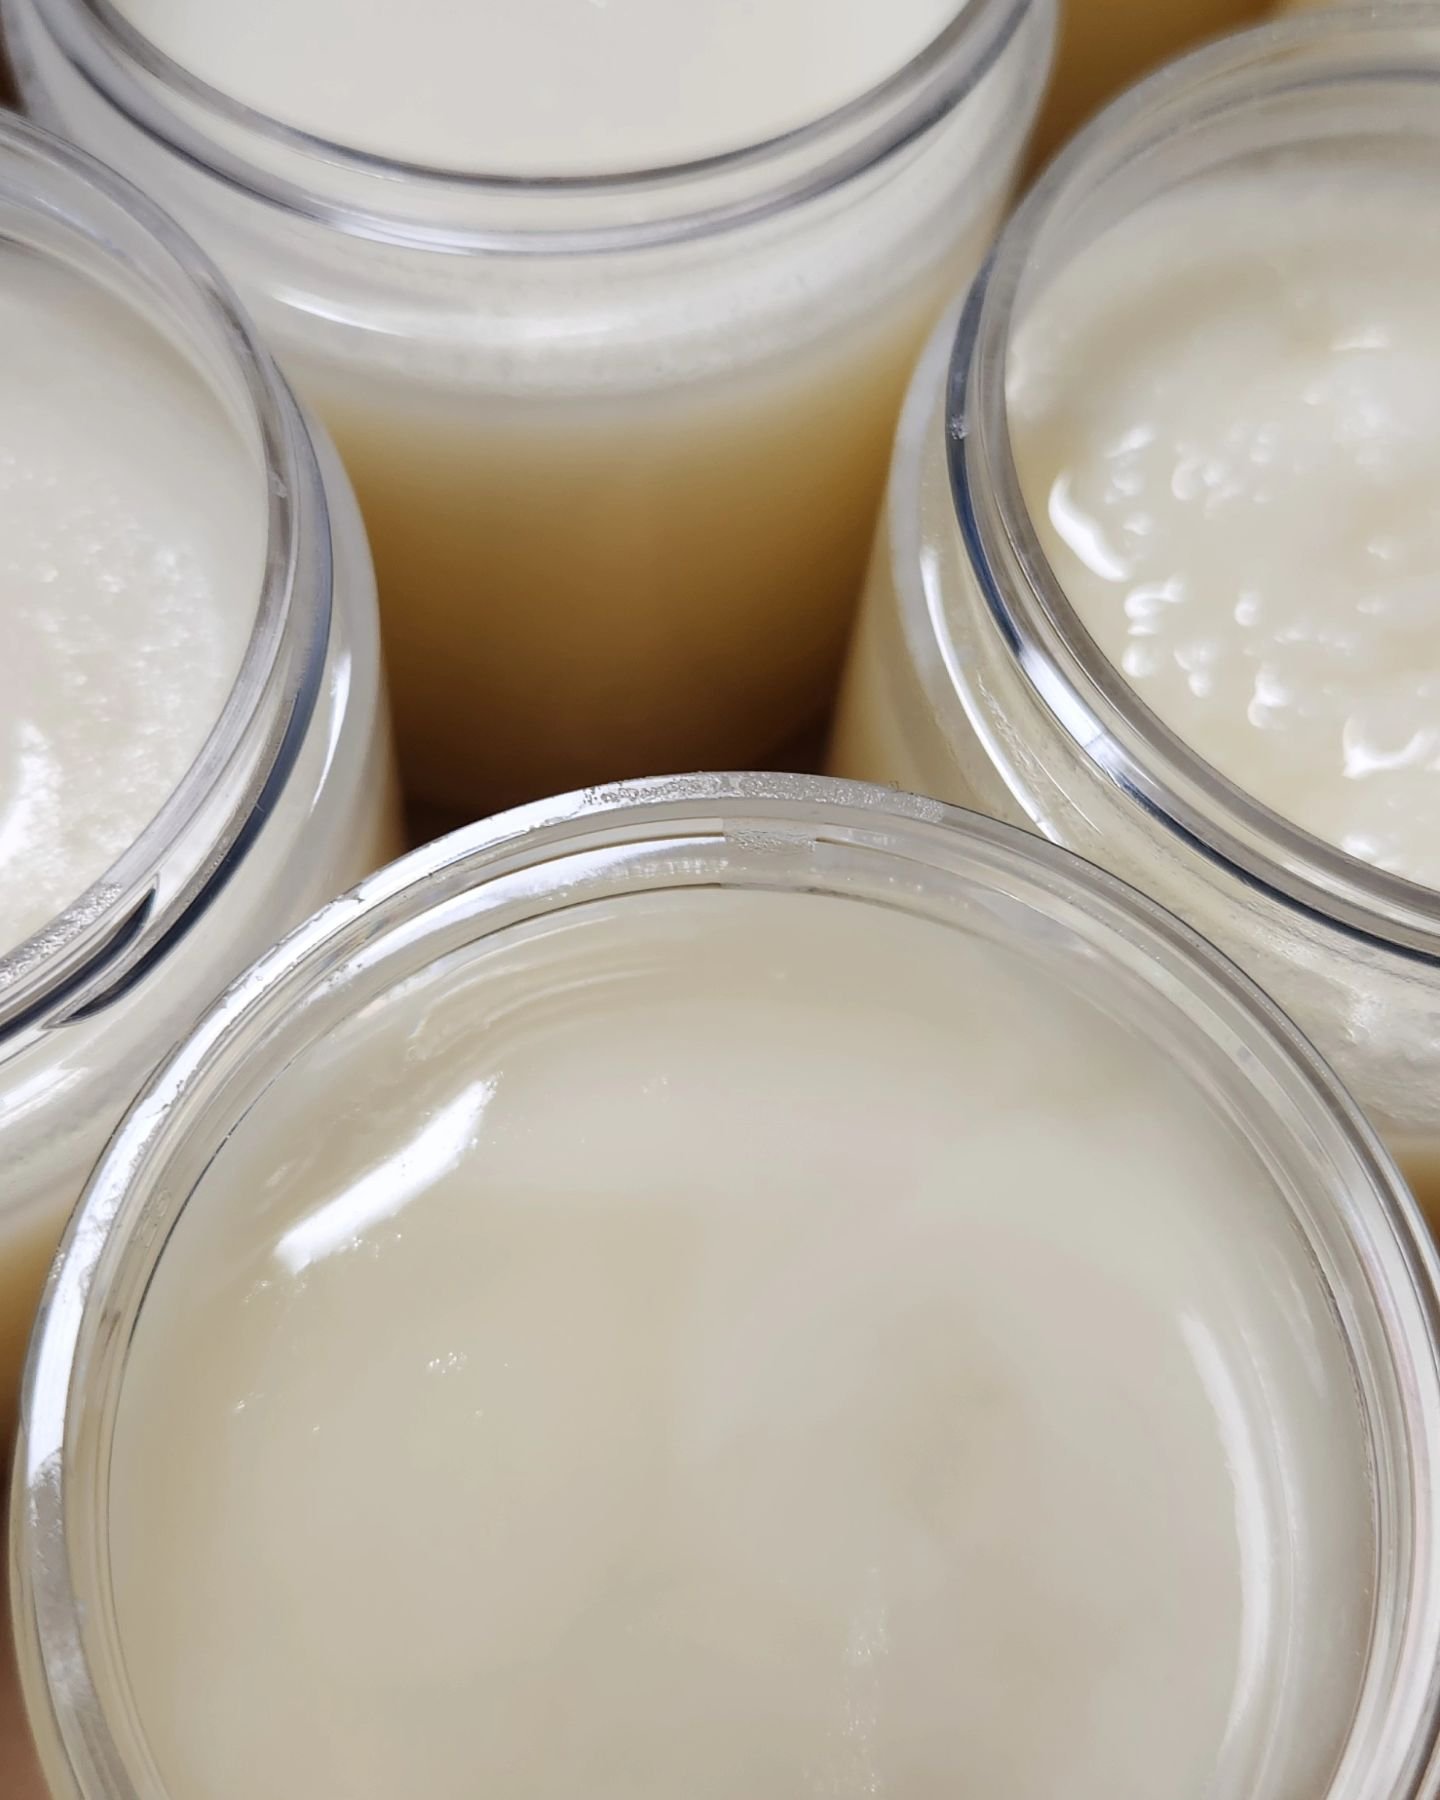 Are you ready for That's That Magic shea butter cream?
#thatsthatmagic #skincare #sheabutter